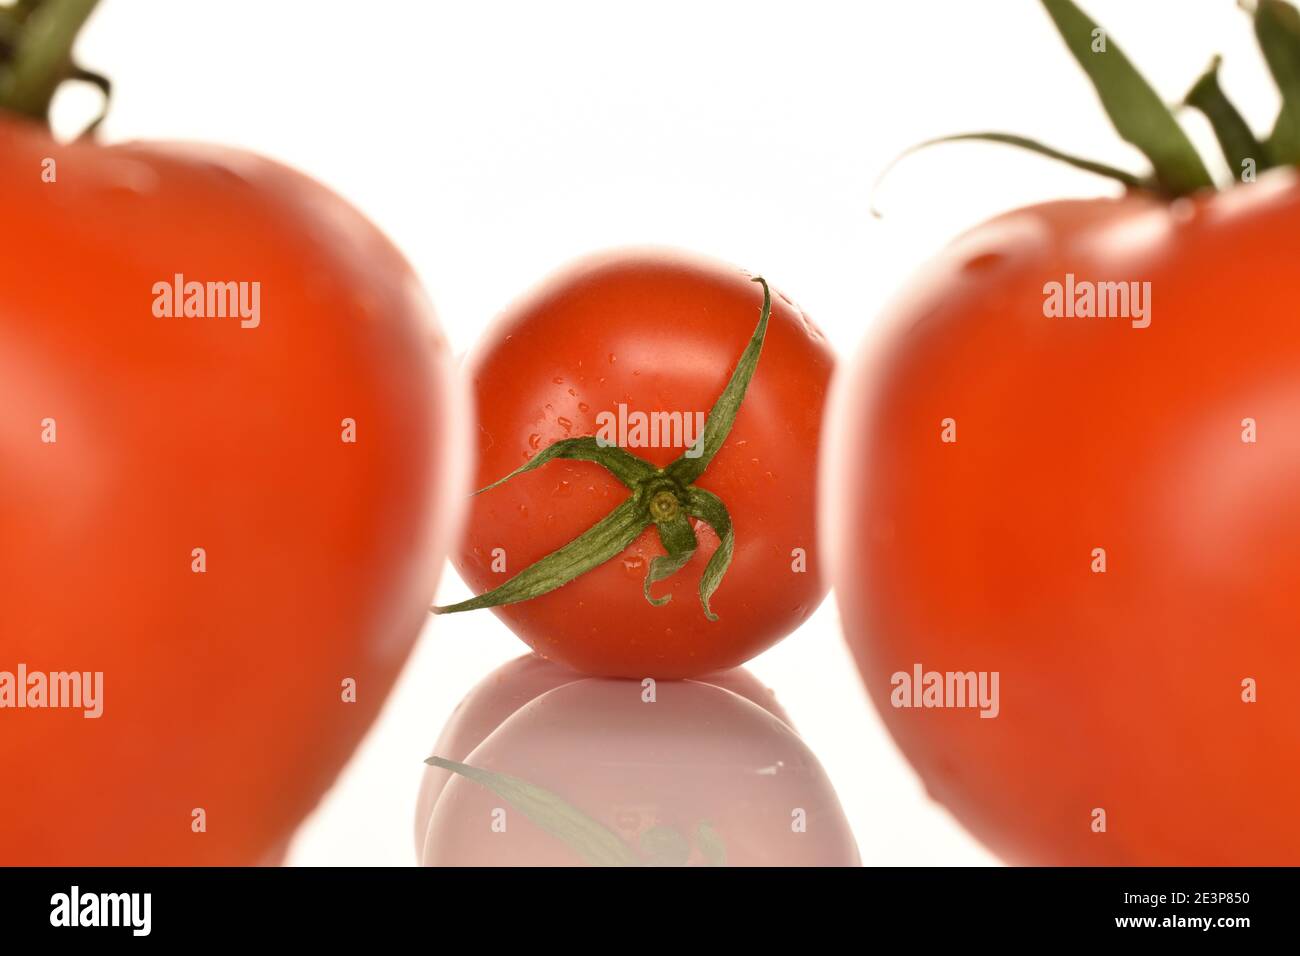 In the center, in the background, in focus, is one whole red juicy tomato. Along the edges, in the foreground, out of focus, two parts of whole tomato Stock Photo